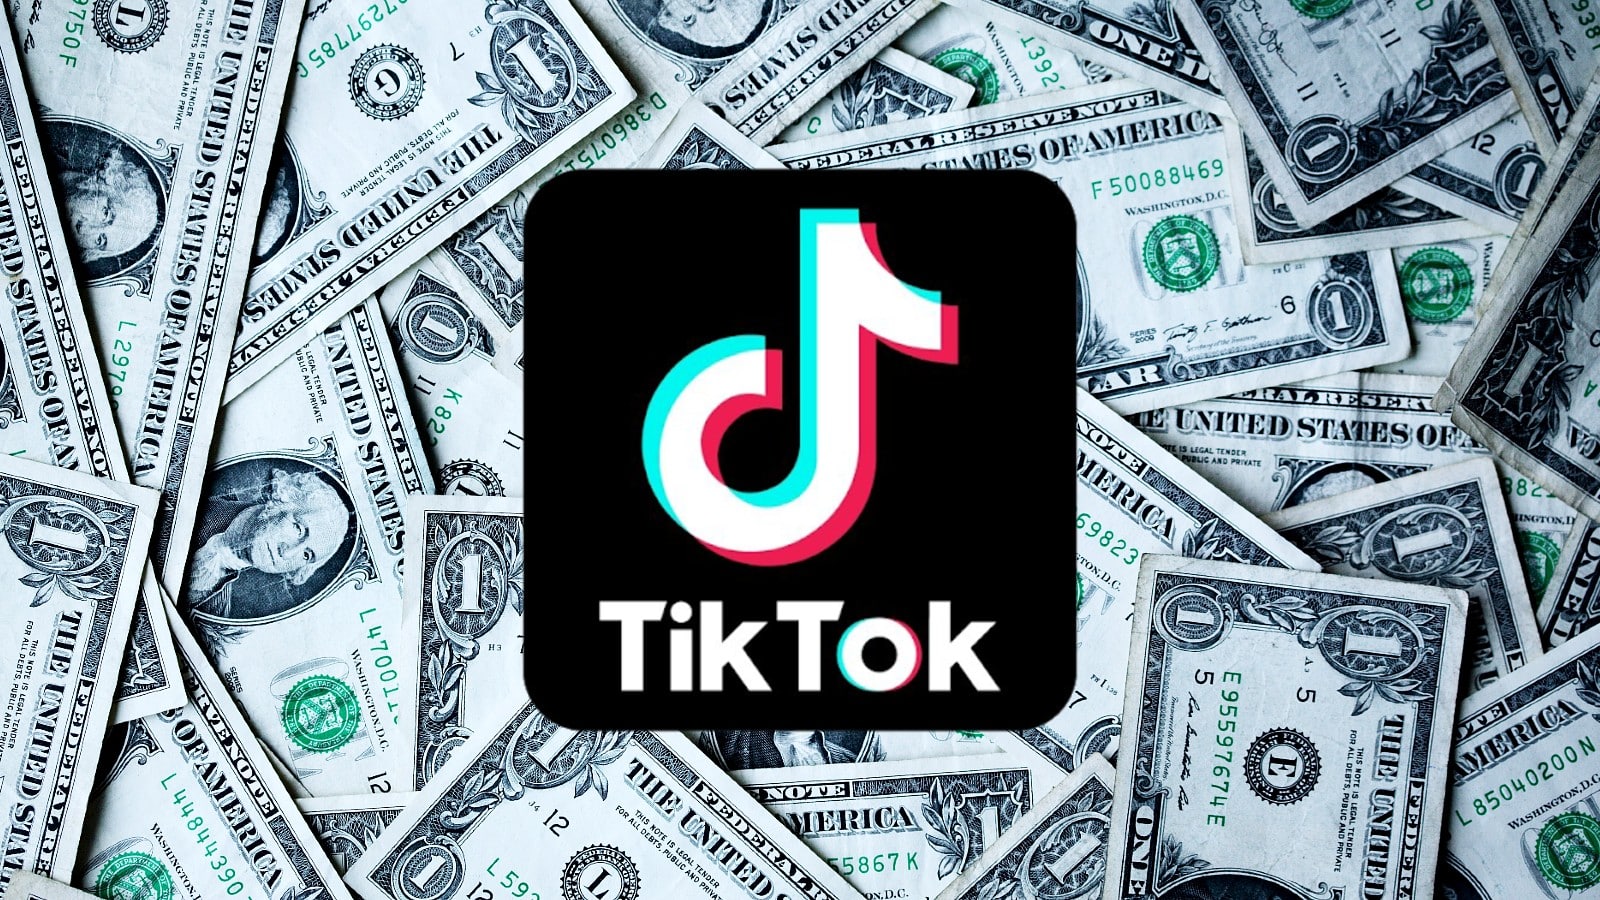 How much does tiktok pay Per view and Follower?